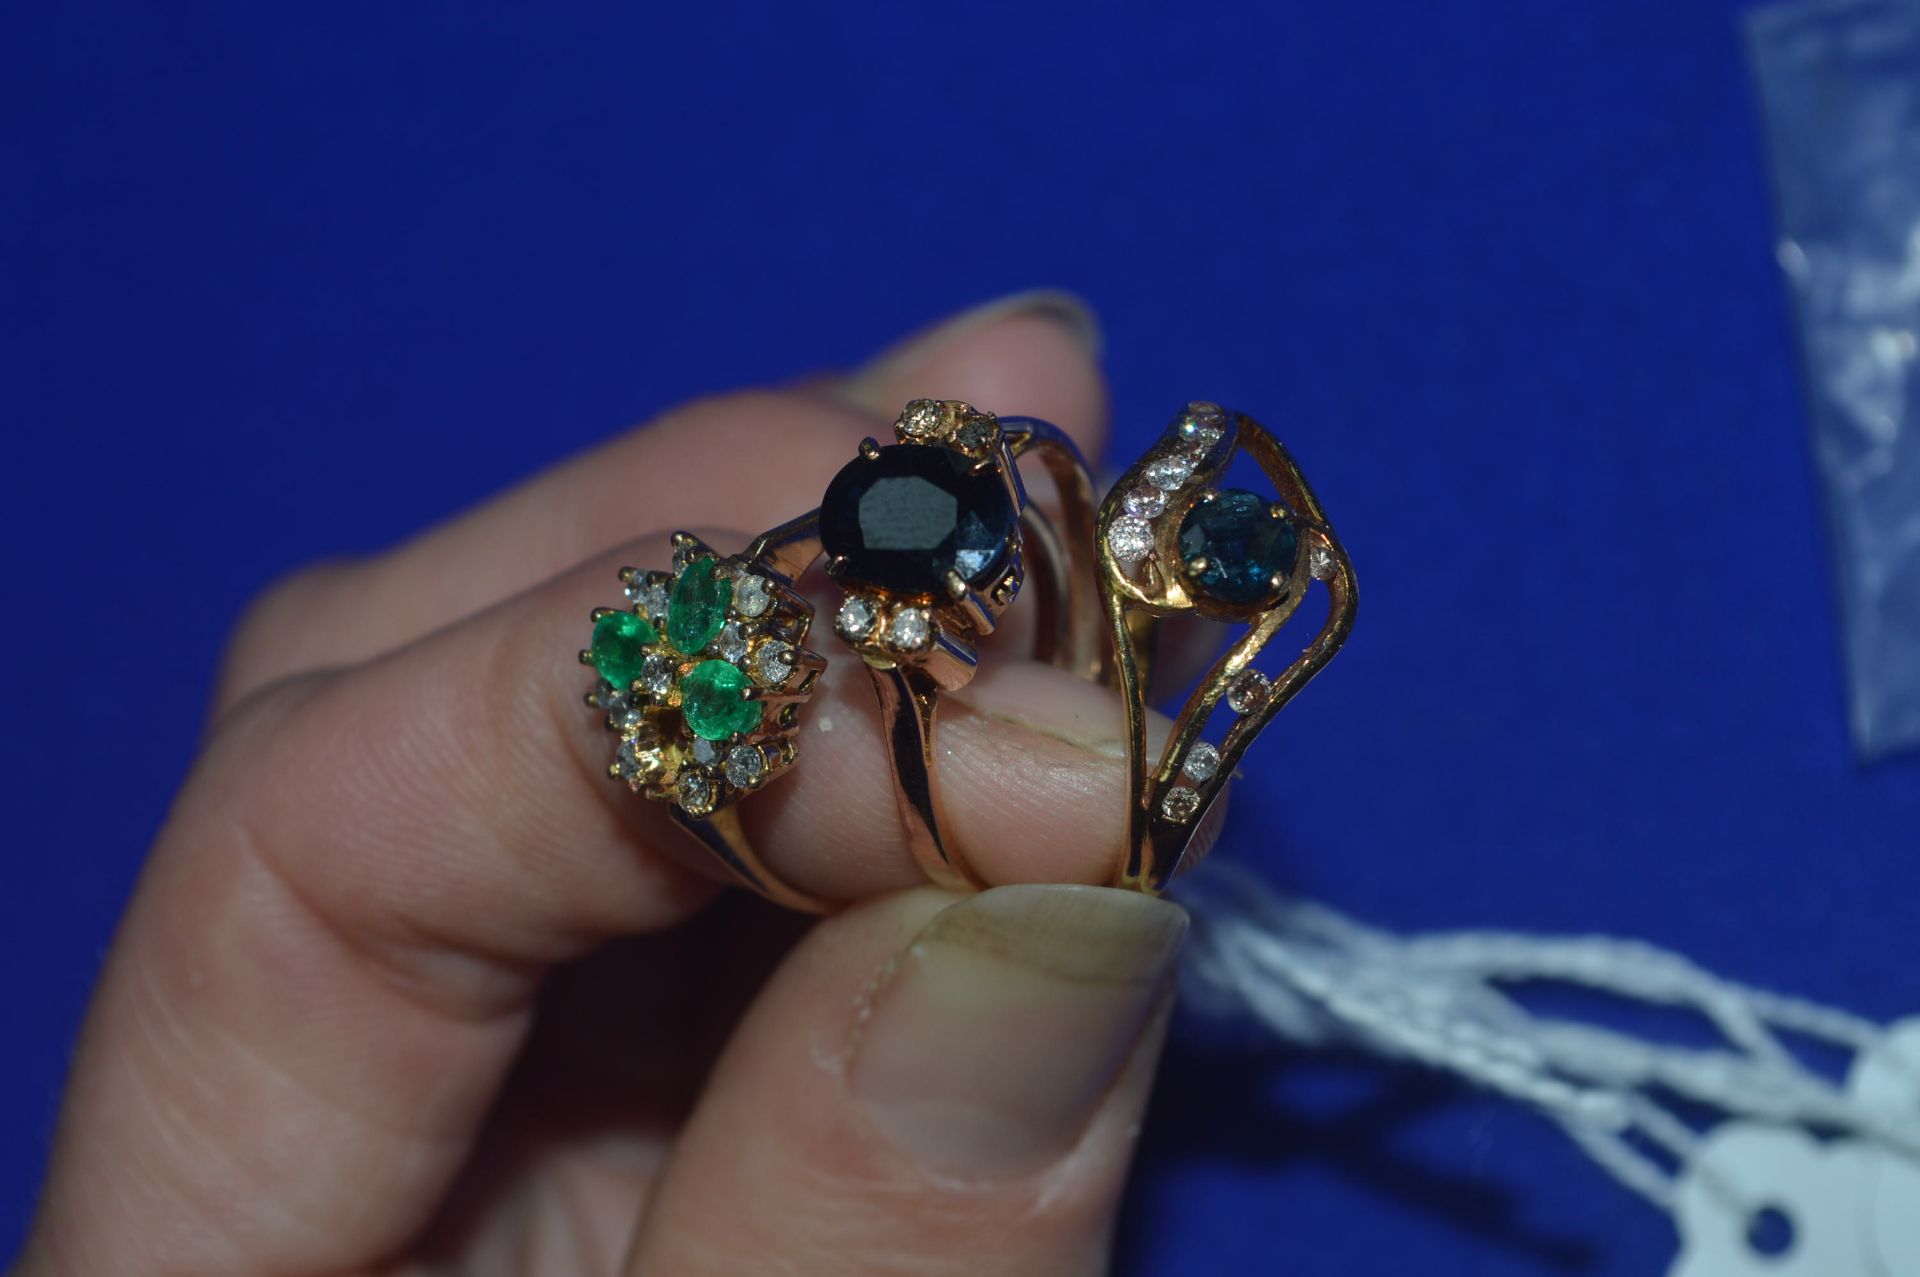 Two 18ct Gold Rings ~6g gross plus One Unmarked Ring (missing some stones) - Image 3 of 5